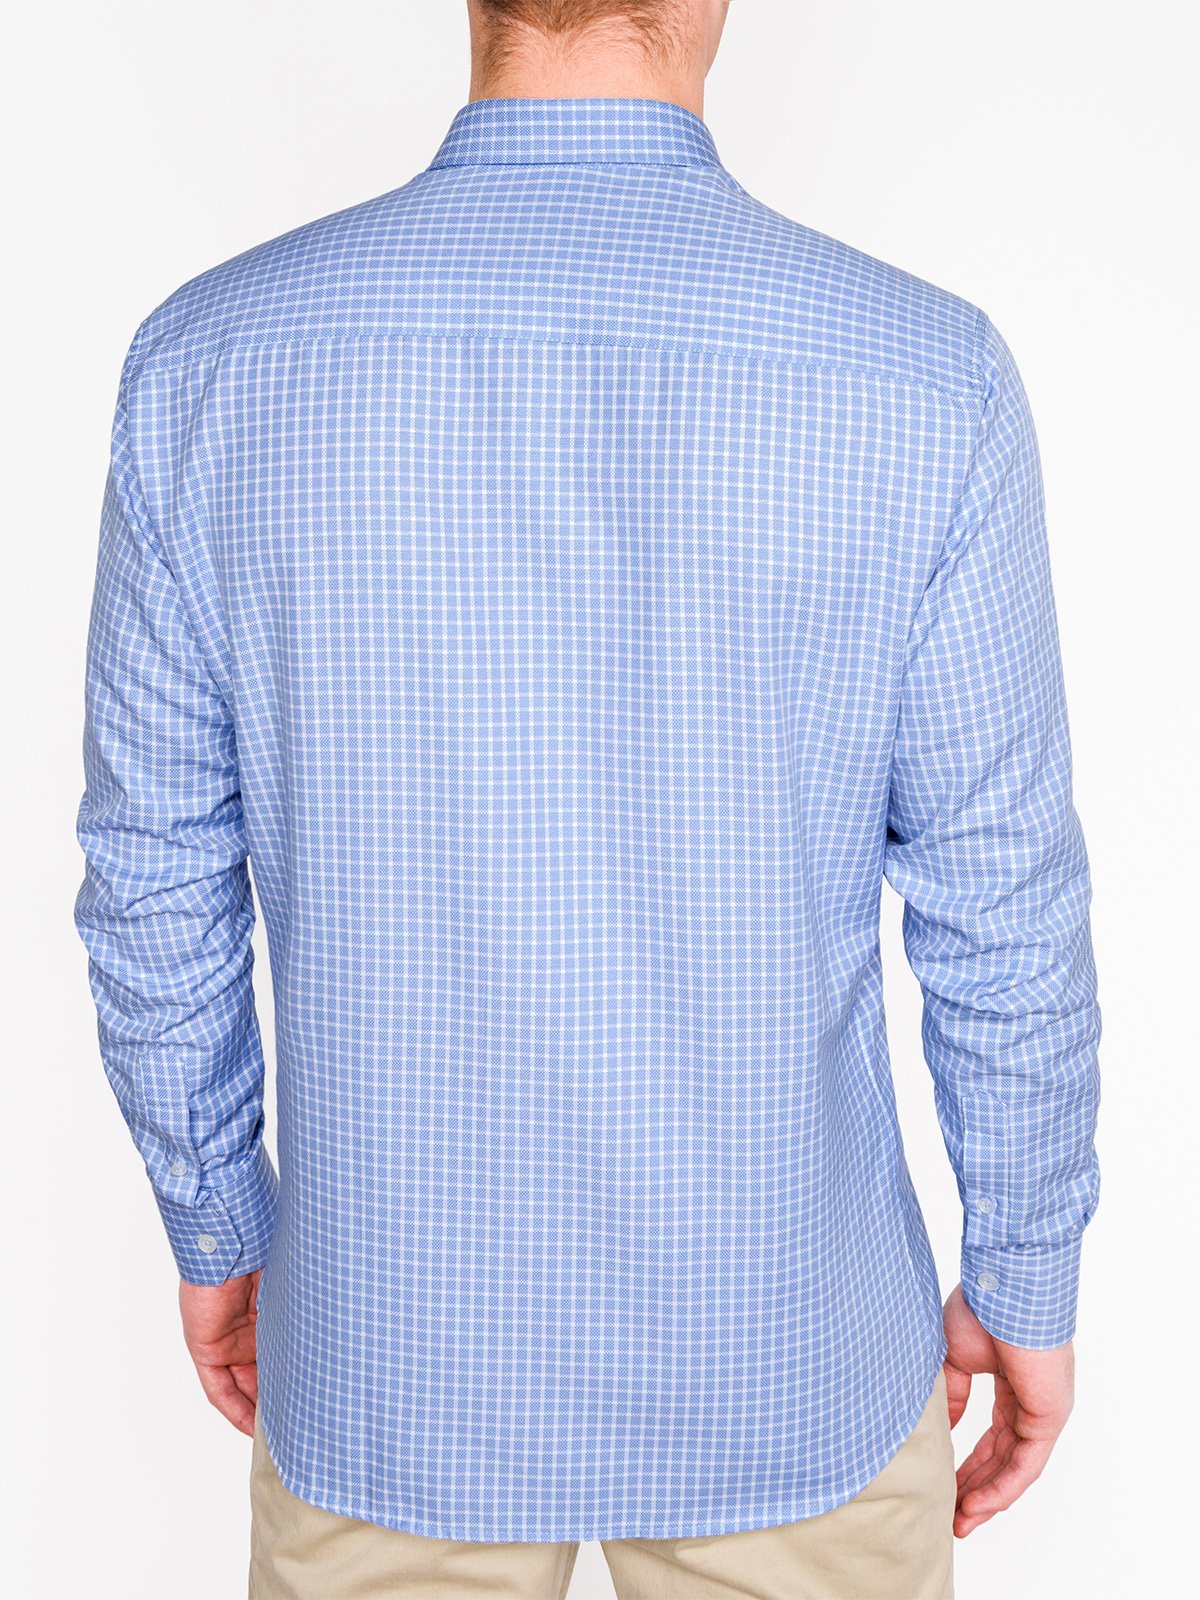 Men's check shirt with long sleeves K451 - light blue | MODONE ...